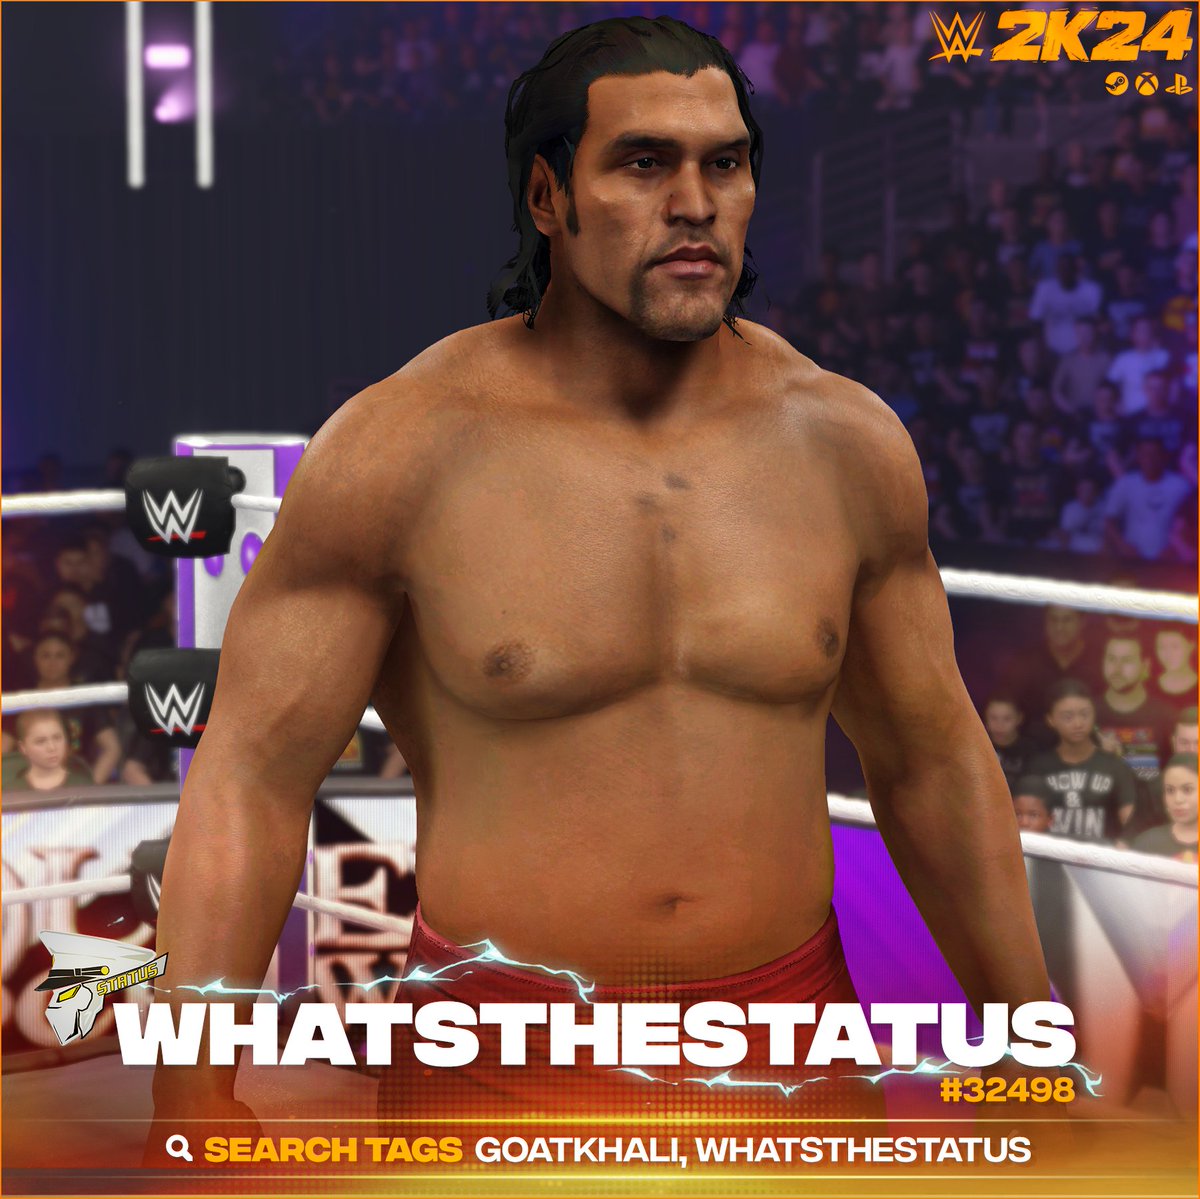 NEW! #WWE2K24 Upload To Community Creations! ★ The Great Khali ★ Search Tag → GOATKHALI or WhatsTheStatus ★ Support Me → linktr.ee/WhatsTheStatus ★ INCLUDES ● Custom Portrait ● Ring Announcer Name (The Great Cali) ● 2010 & 2007 Attires ● Height mod to match Andre The…